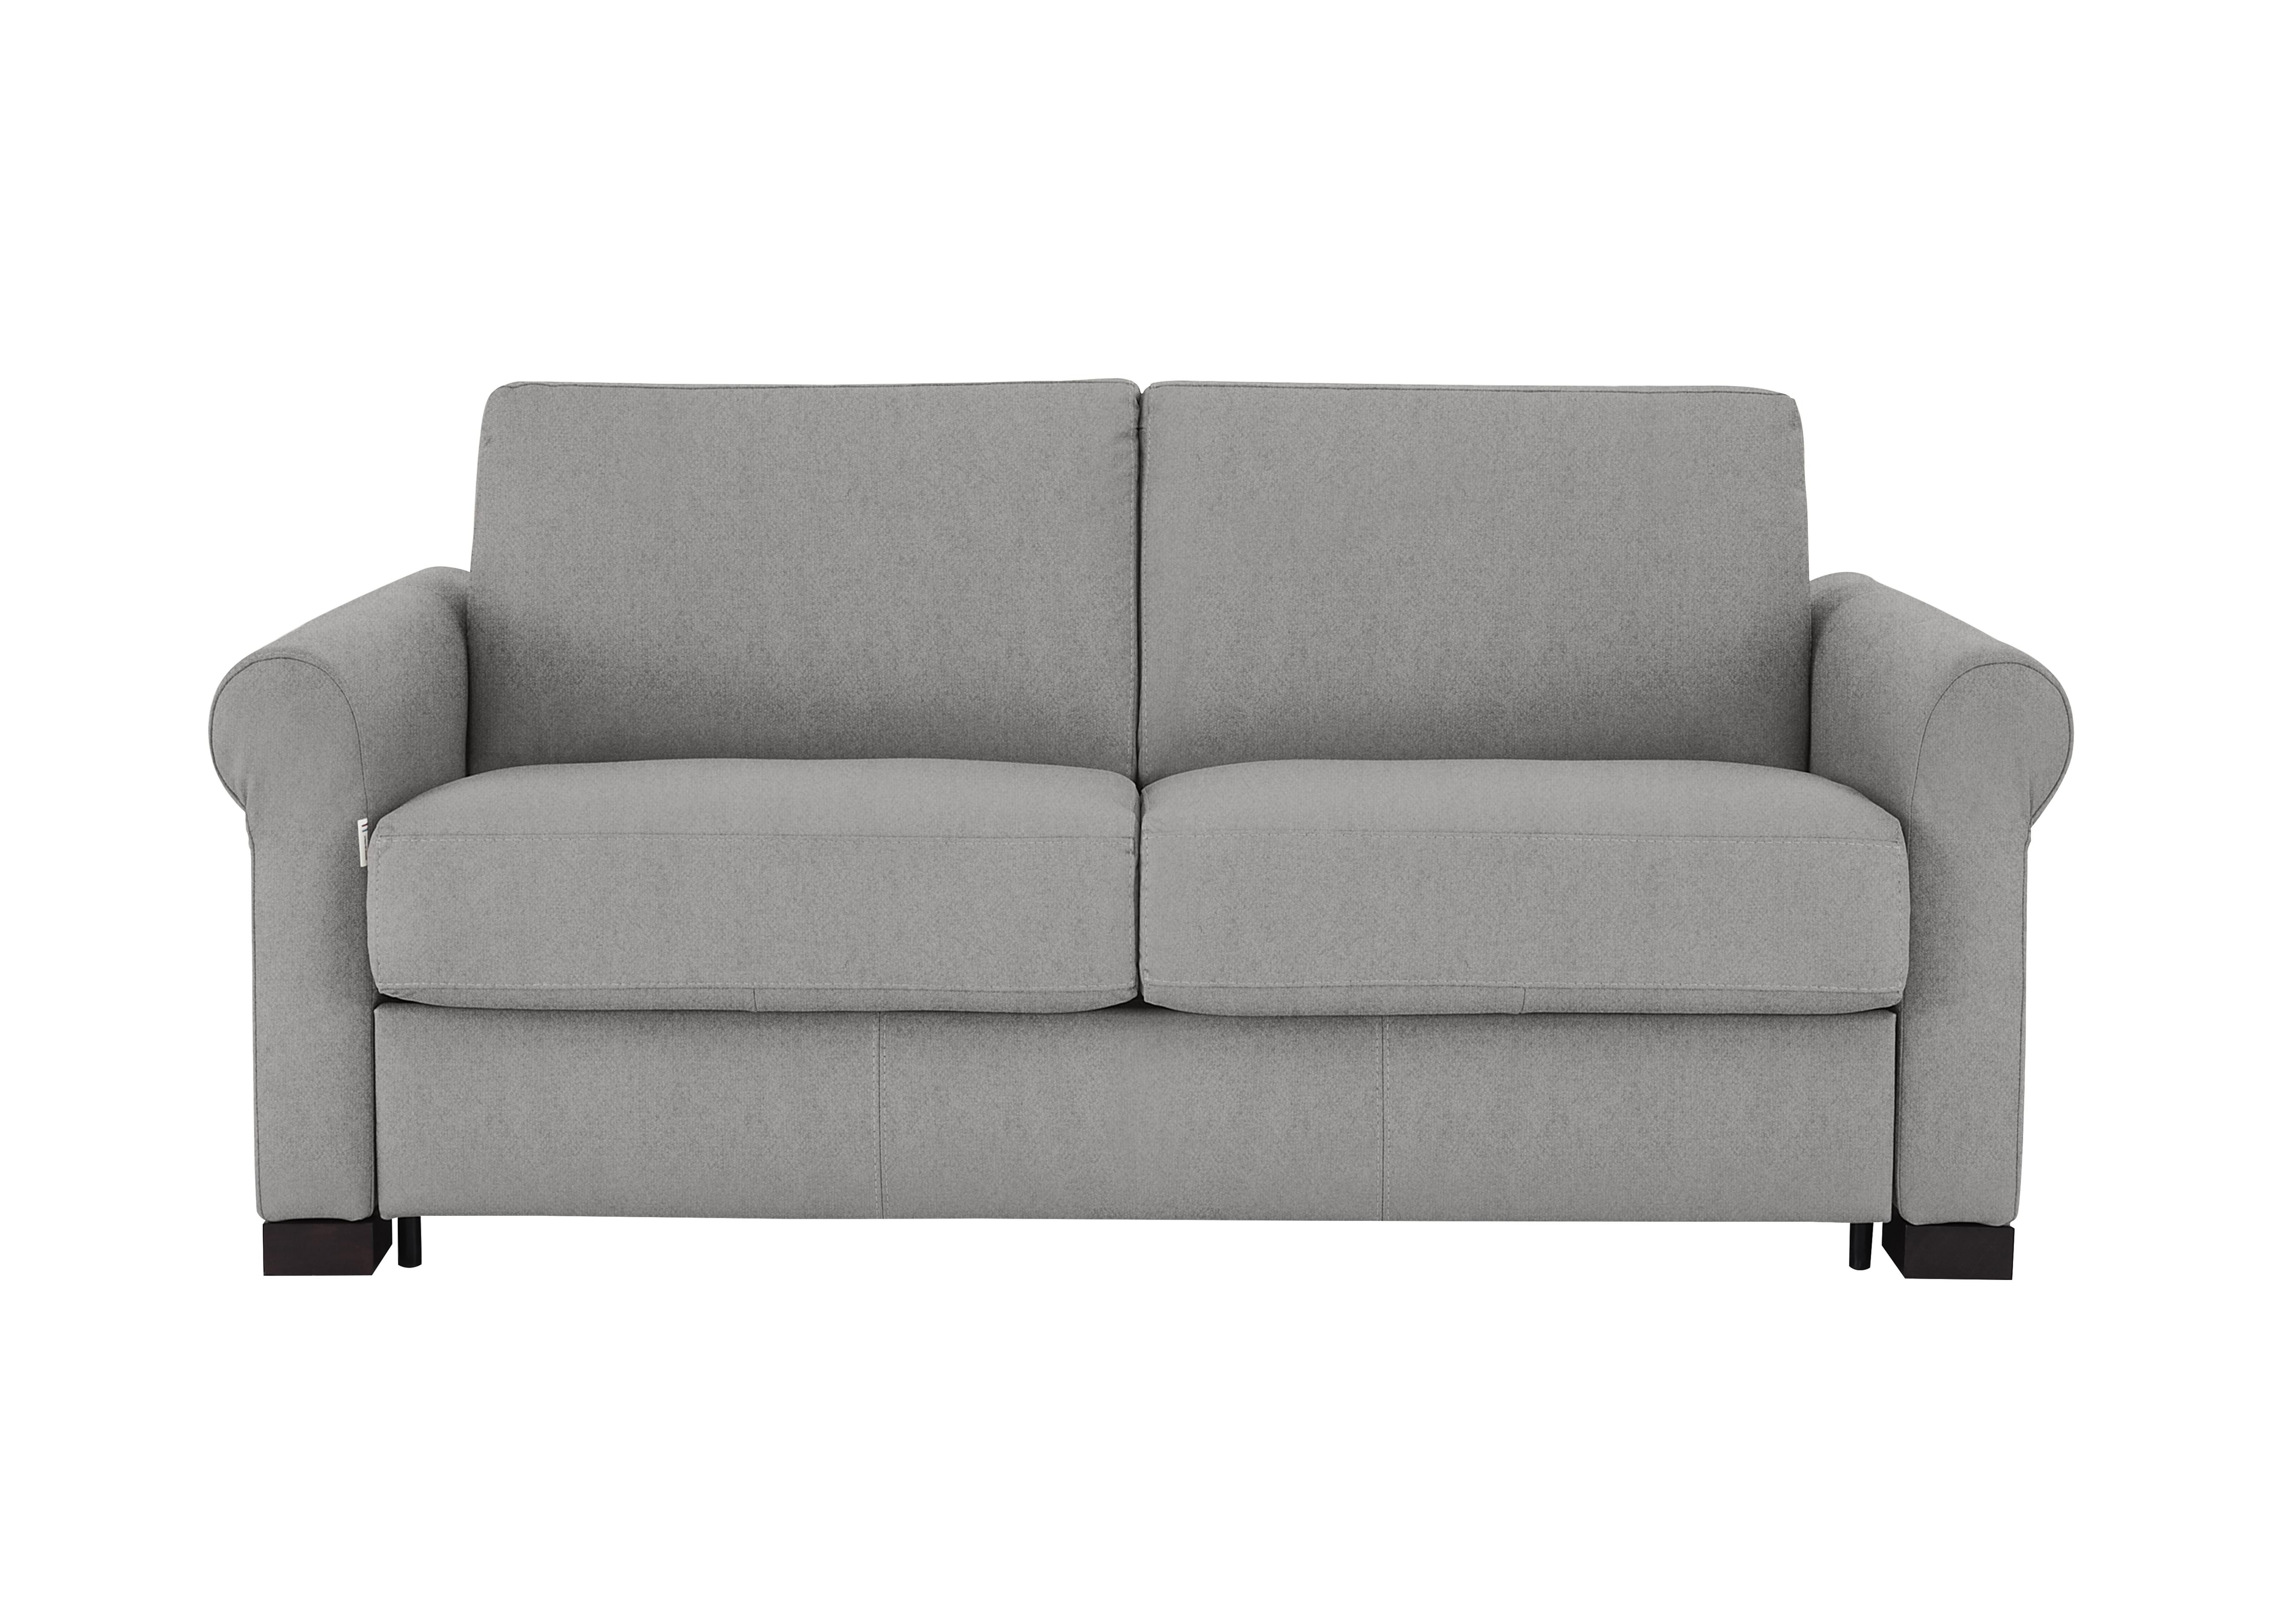 Alcova 2 Seater Fabric Sofa Bed with Scroll Arms in Fuente Ash on Furniture Village